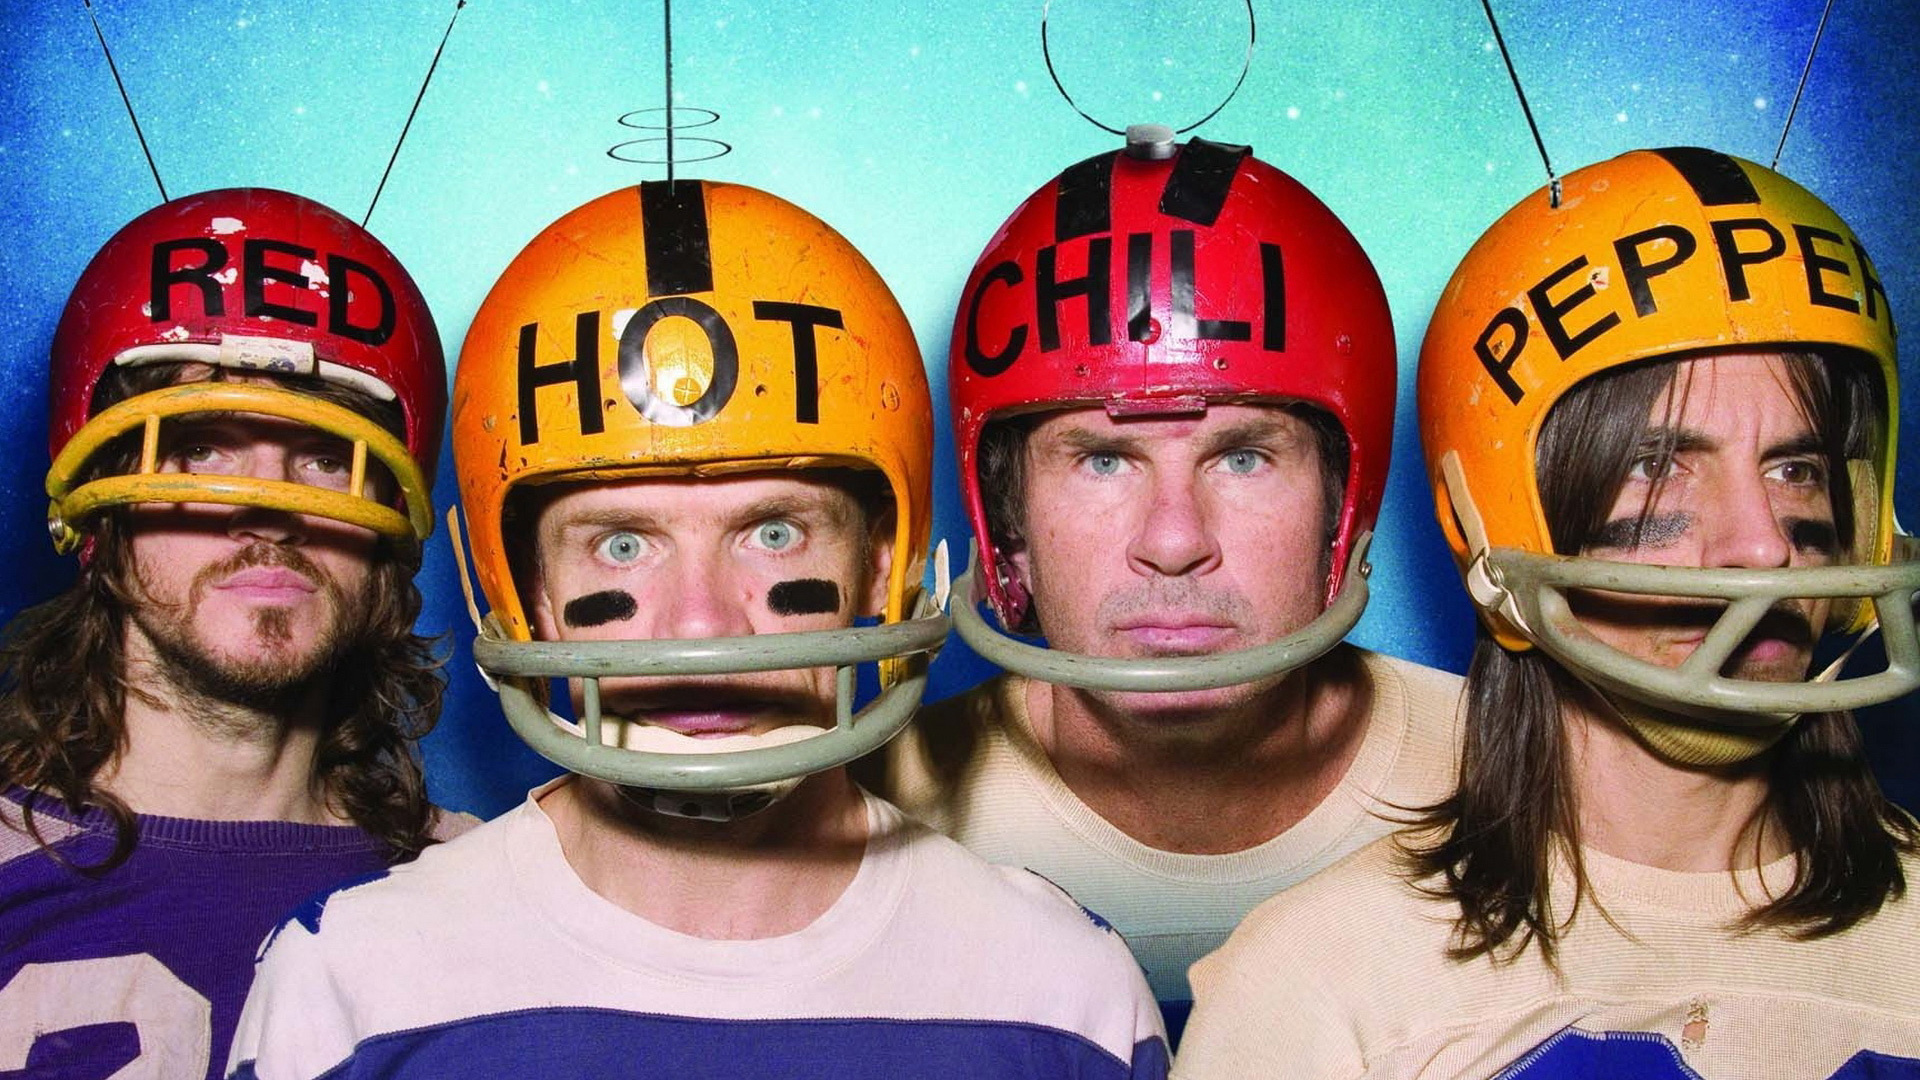 20+ Red Hot Chili Peppers HD Wallpapers and Backgrounds 1920x1080